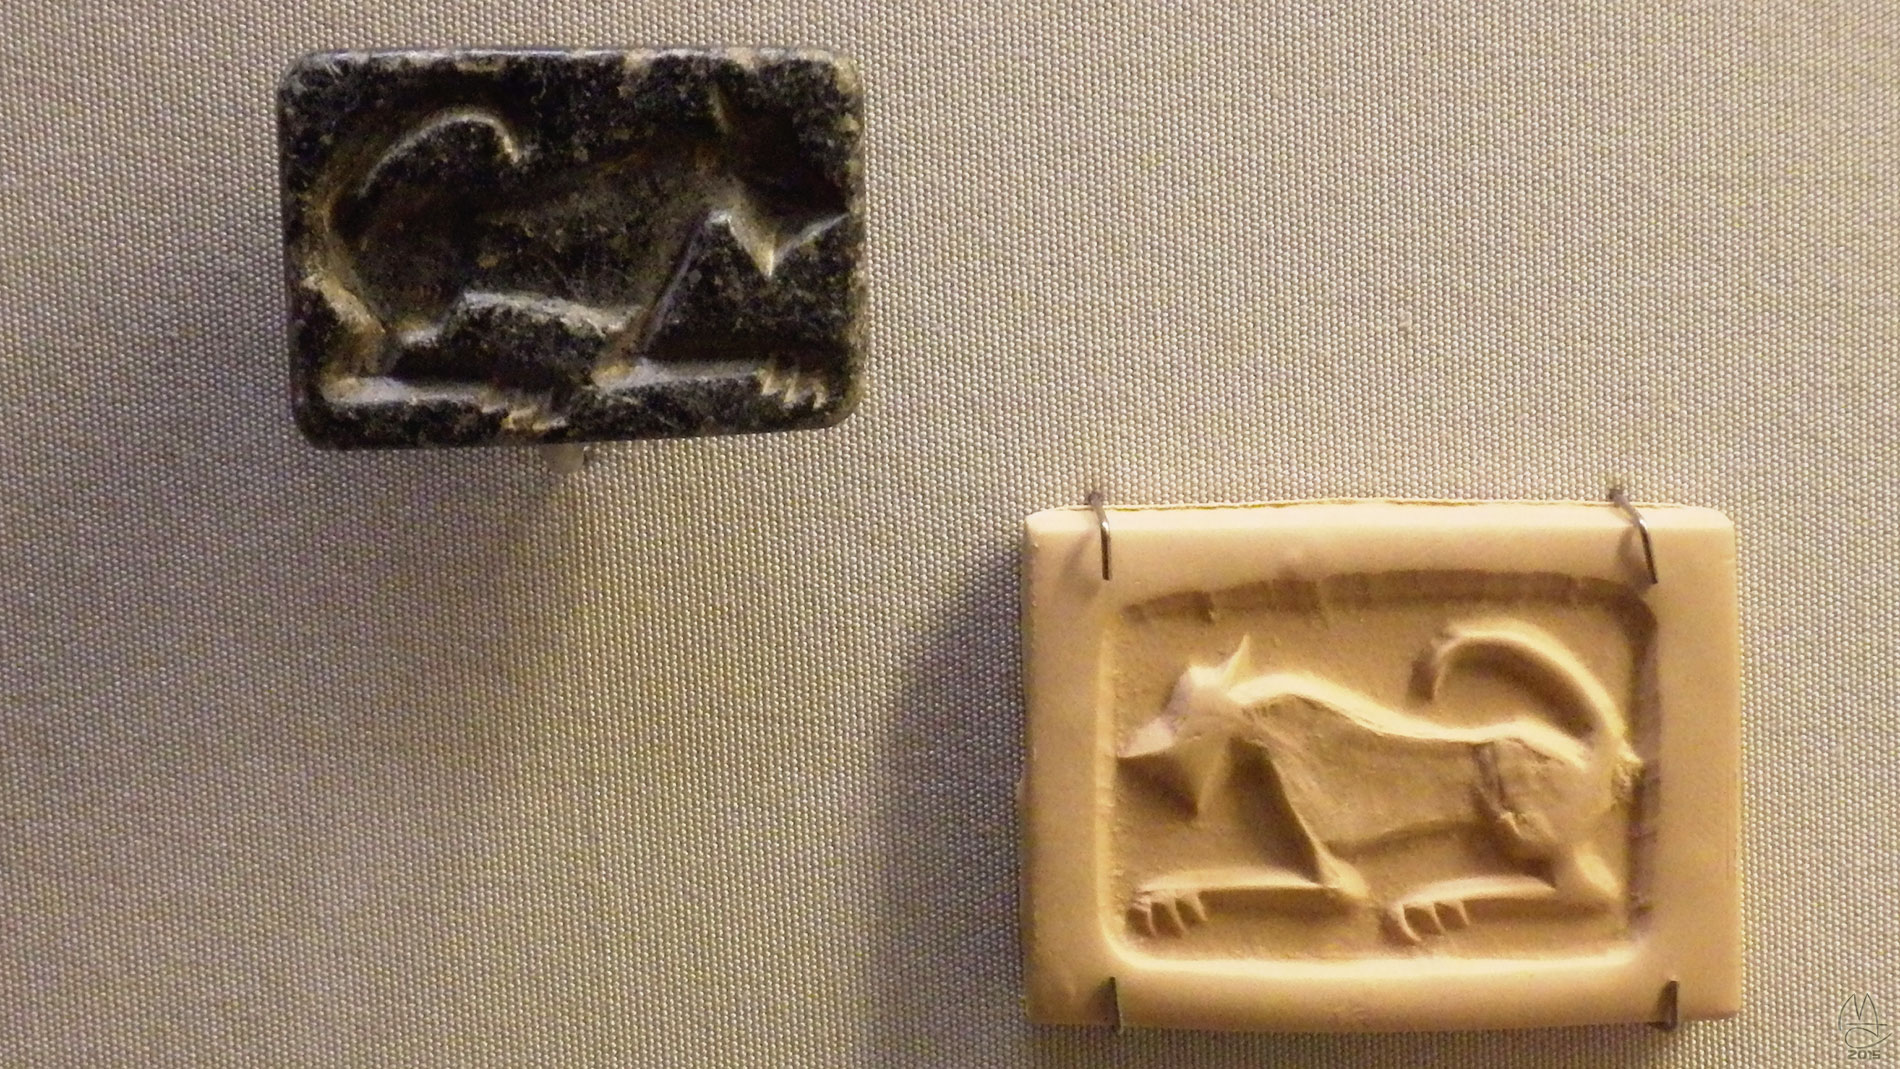 Stamp Seal with Crouching Lion (and modern impression) 4000- 3300 BCE